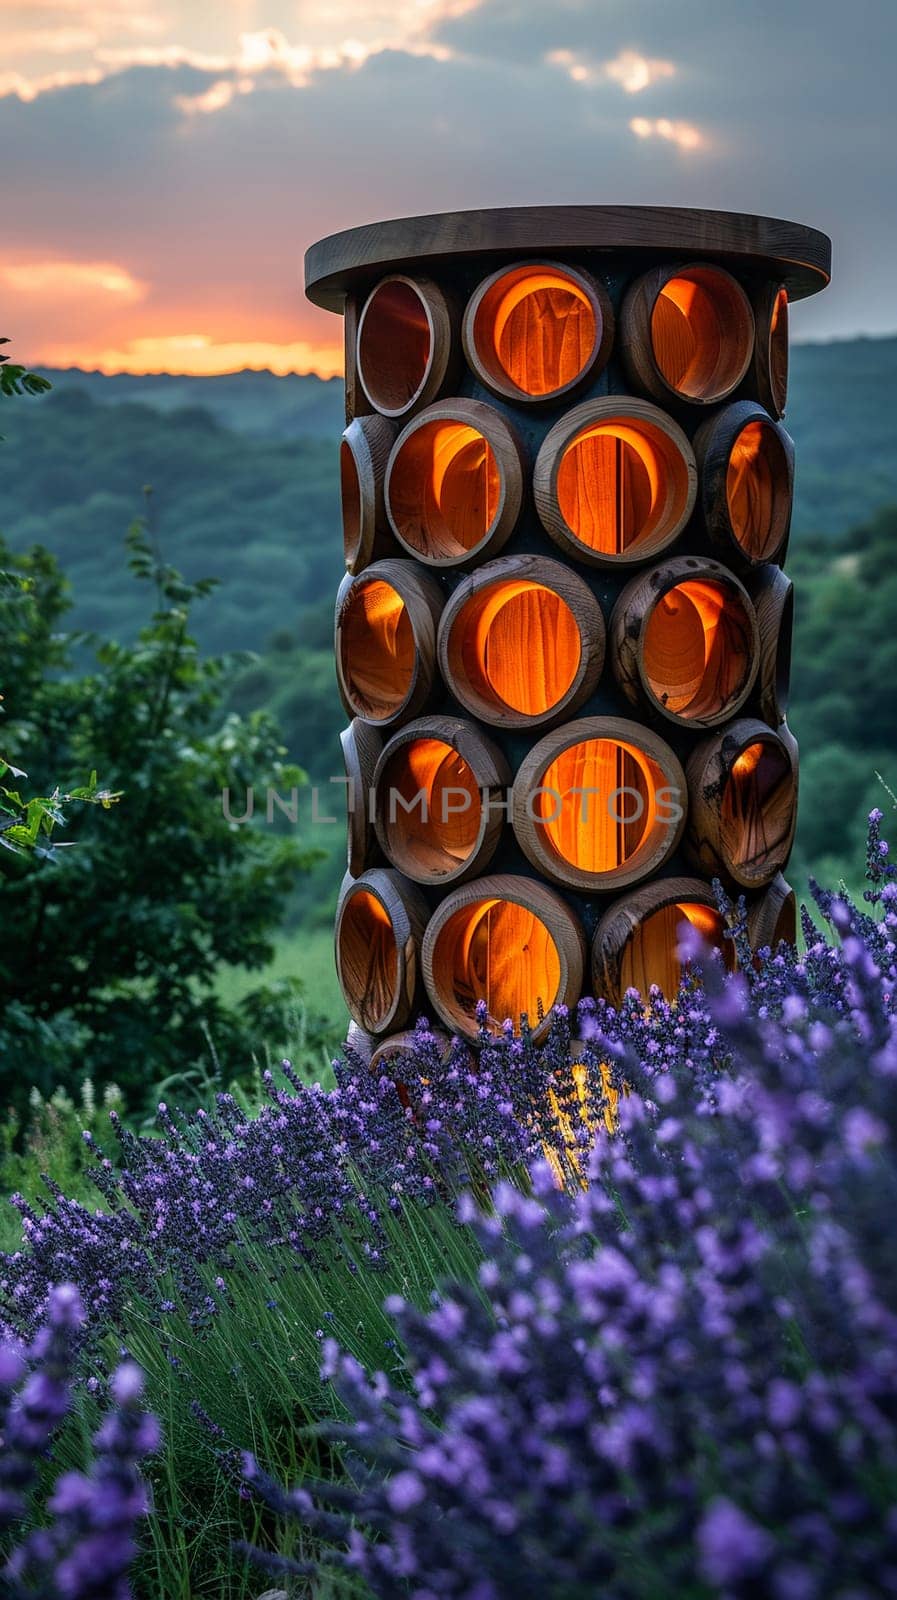 Honeycomb Patterned Stand in a Field of Wild Lavender, The structure blends with the natural setting, perfect for organic skincare ranges.